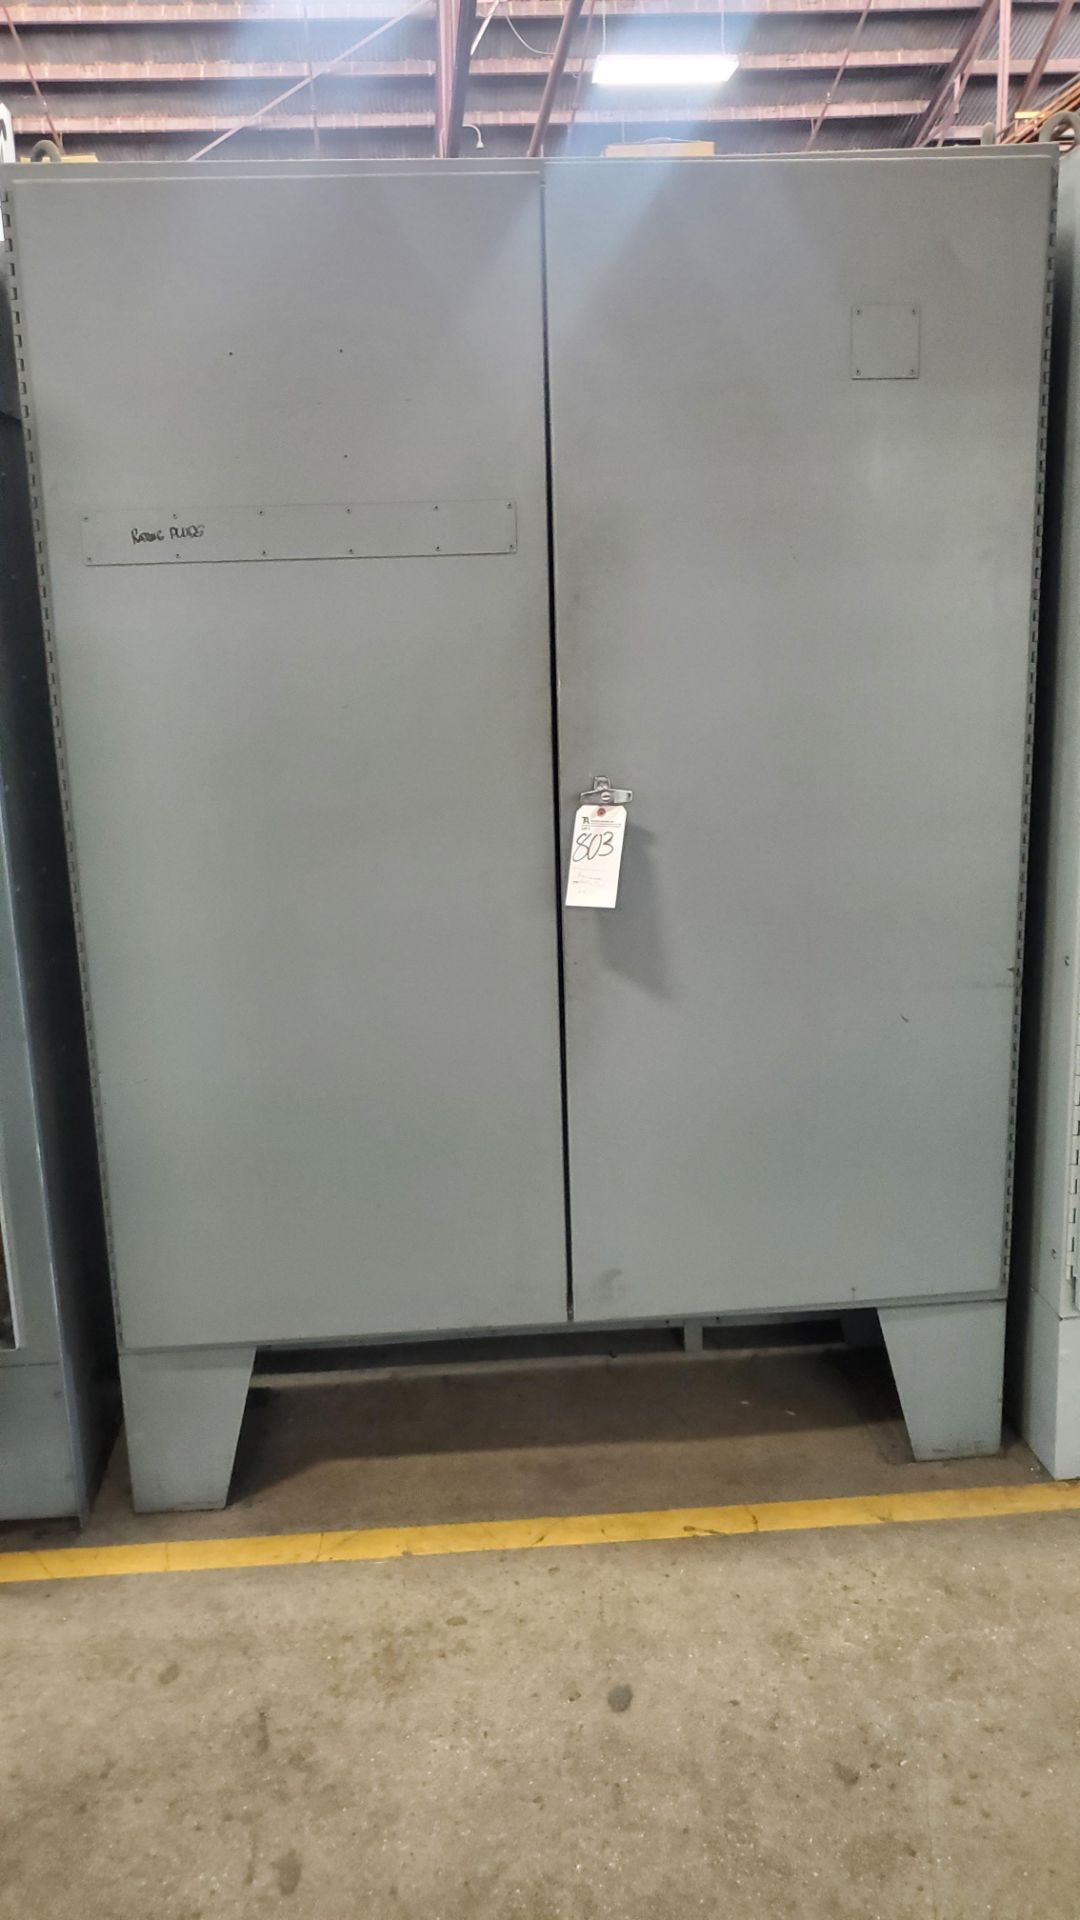 (Lot) Programmers, Rating Plugs, Misc w/ Cabinet (LOADING FEES: $200)